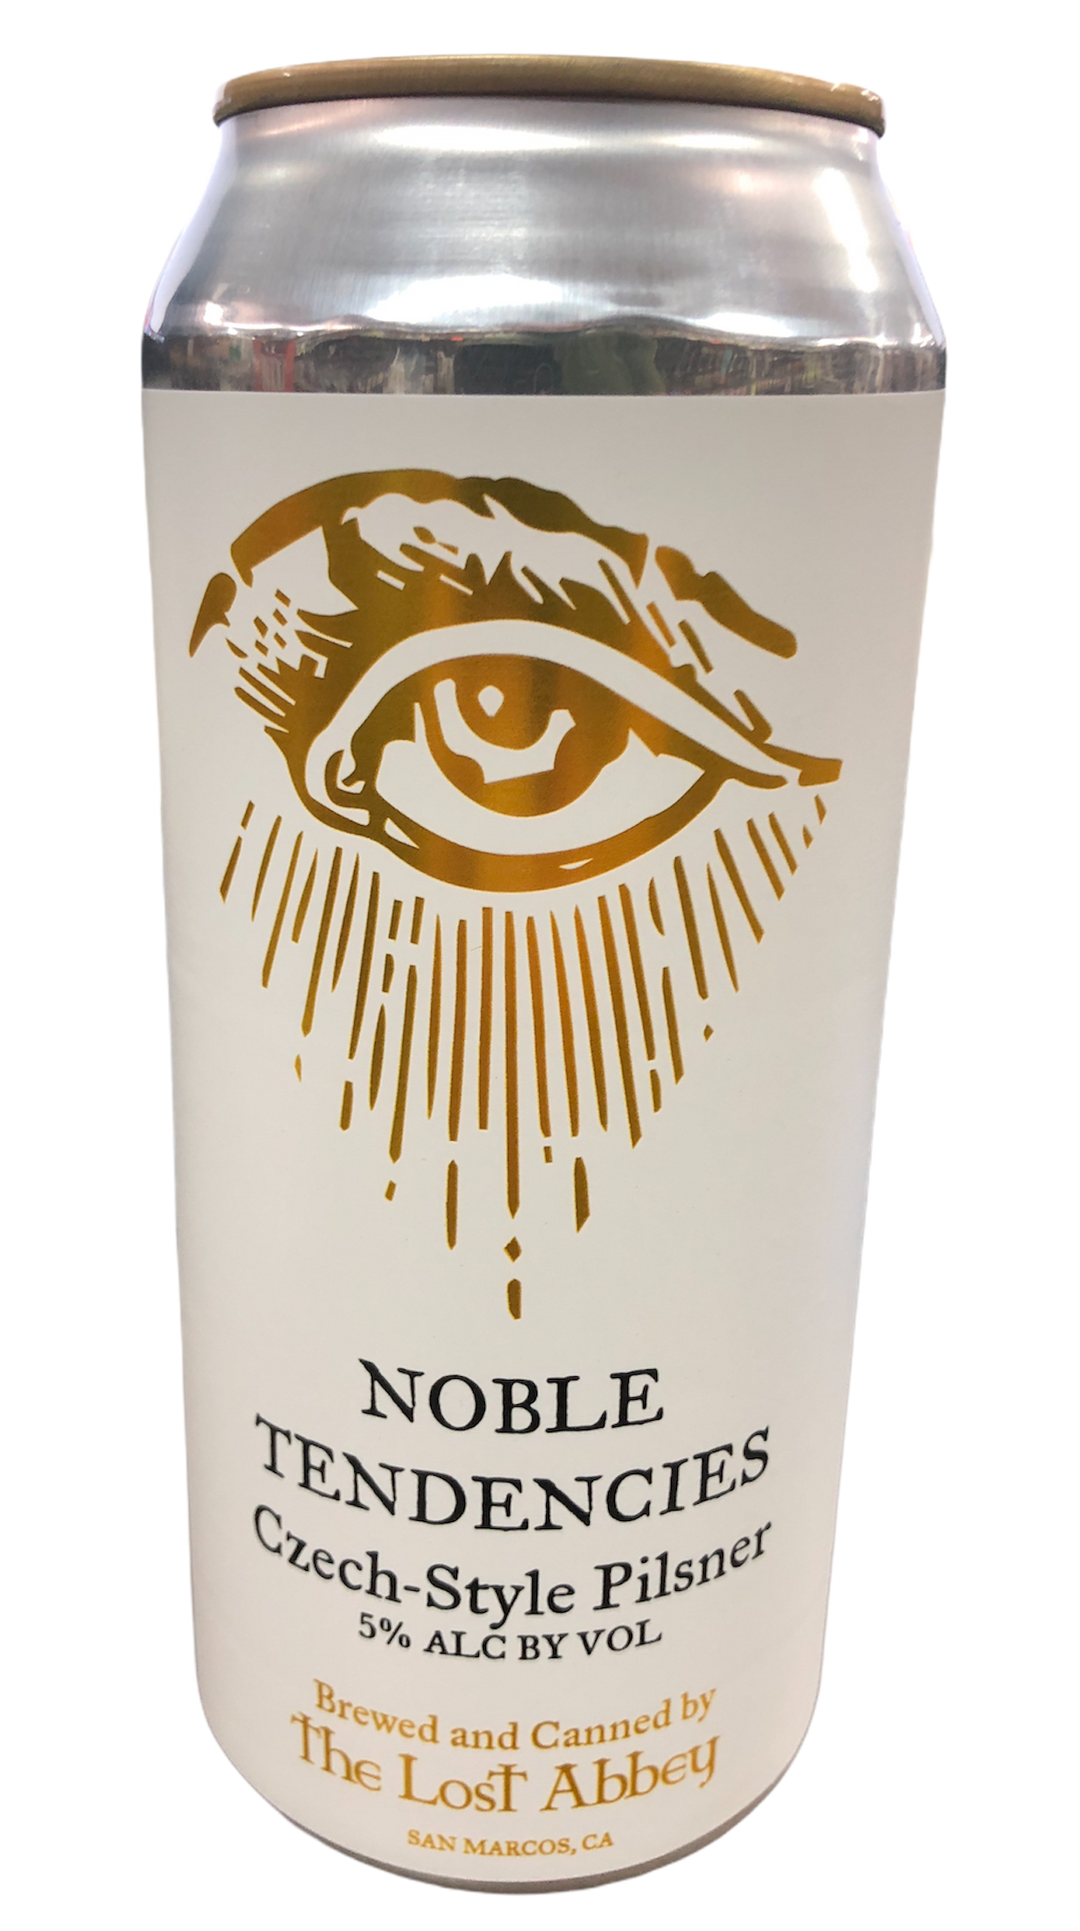 Buy The Lost Abbey Noble Tendencies Online -Craft City